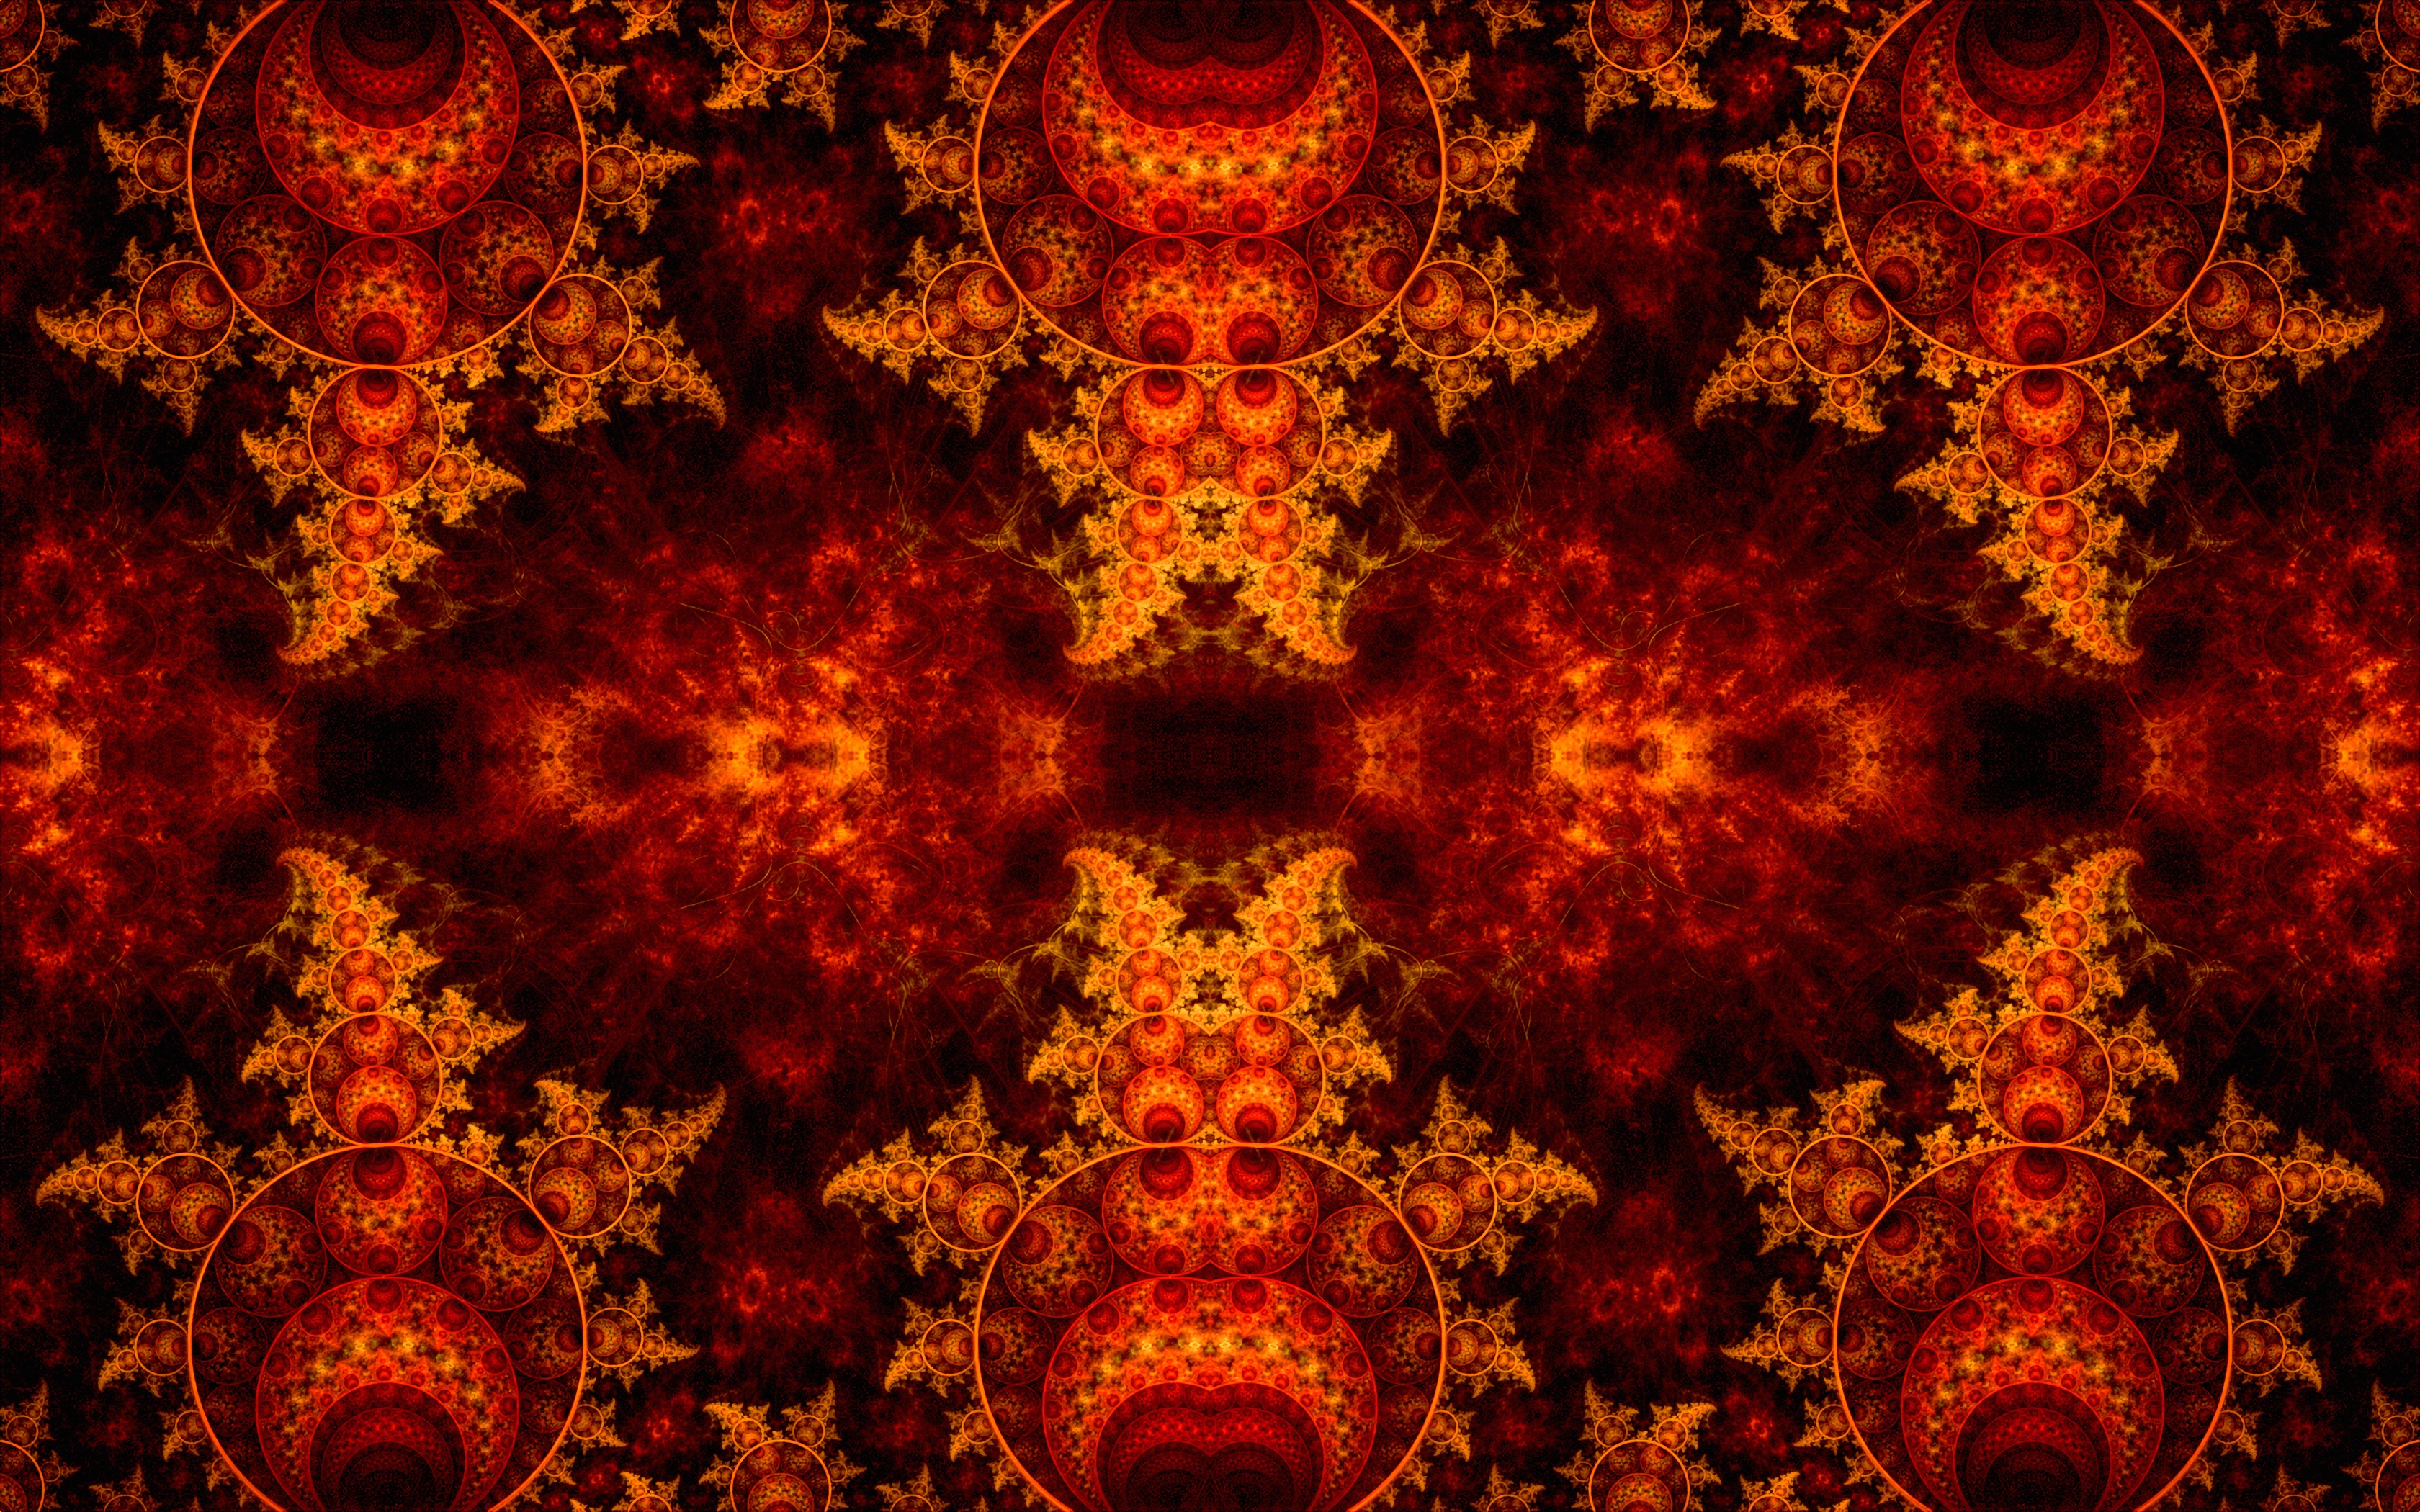 fractal, abstract, pattern, confused, intricate, flaming, fiery